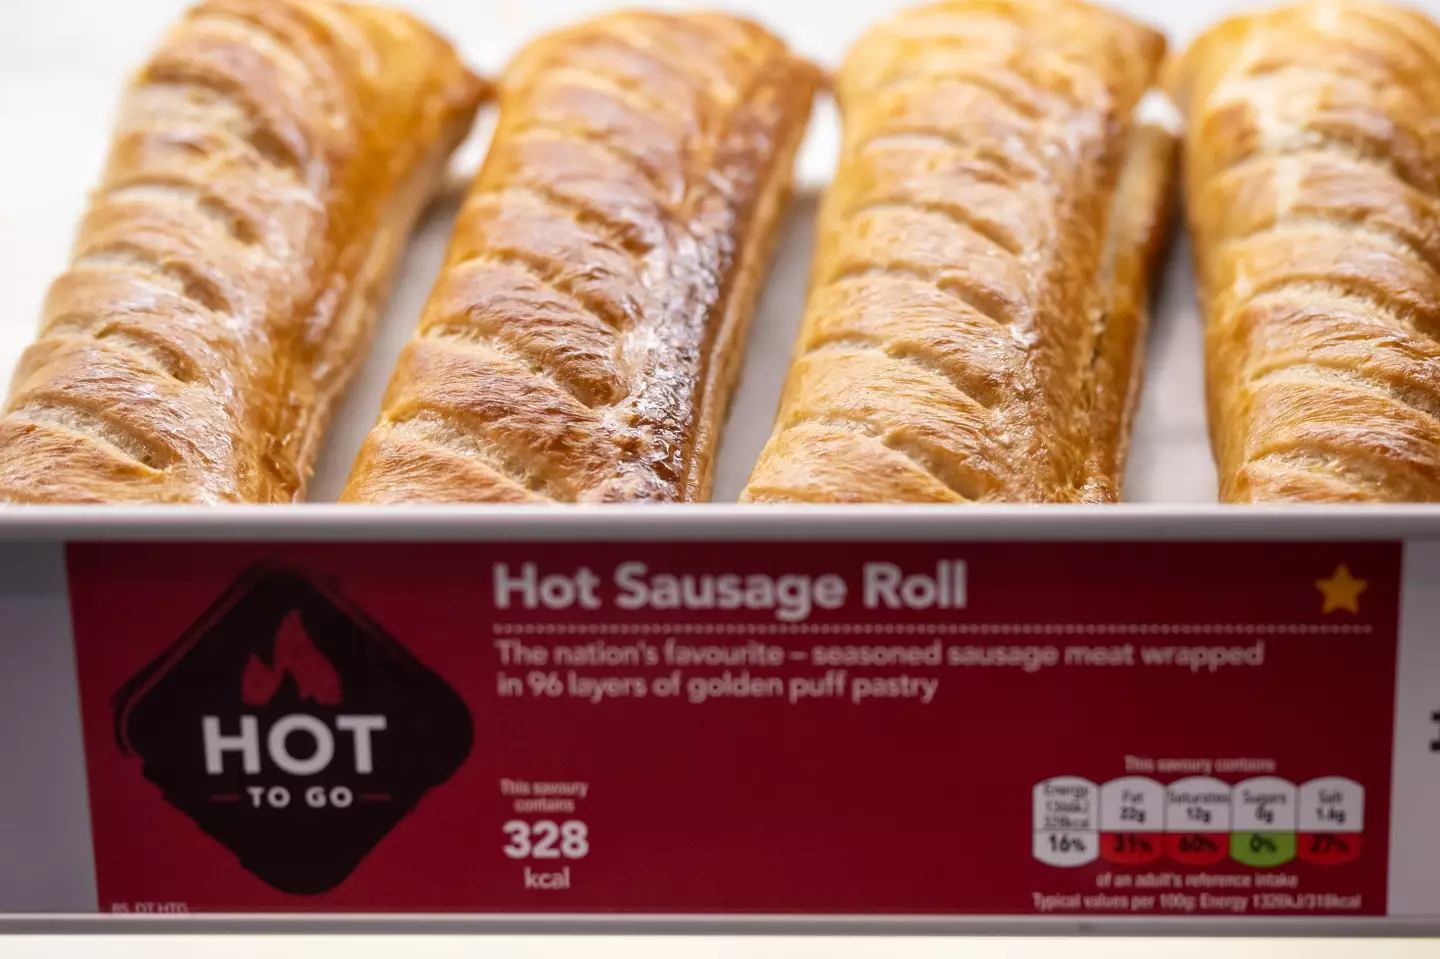 You want your sausage roll to be hot, so what time is best to go in and get it?